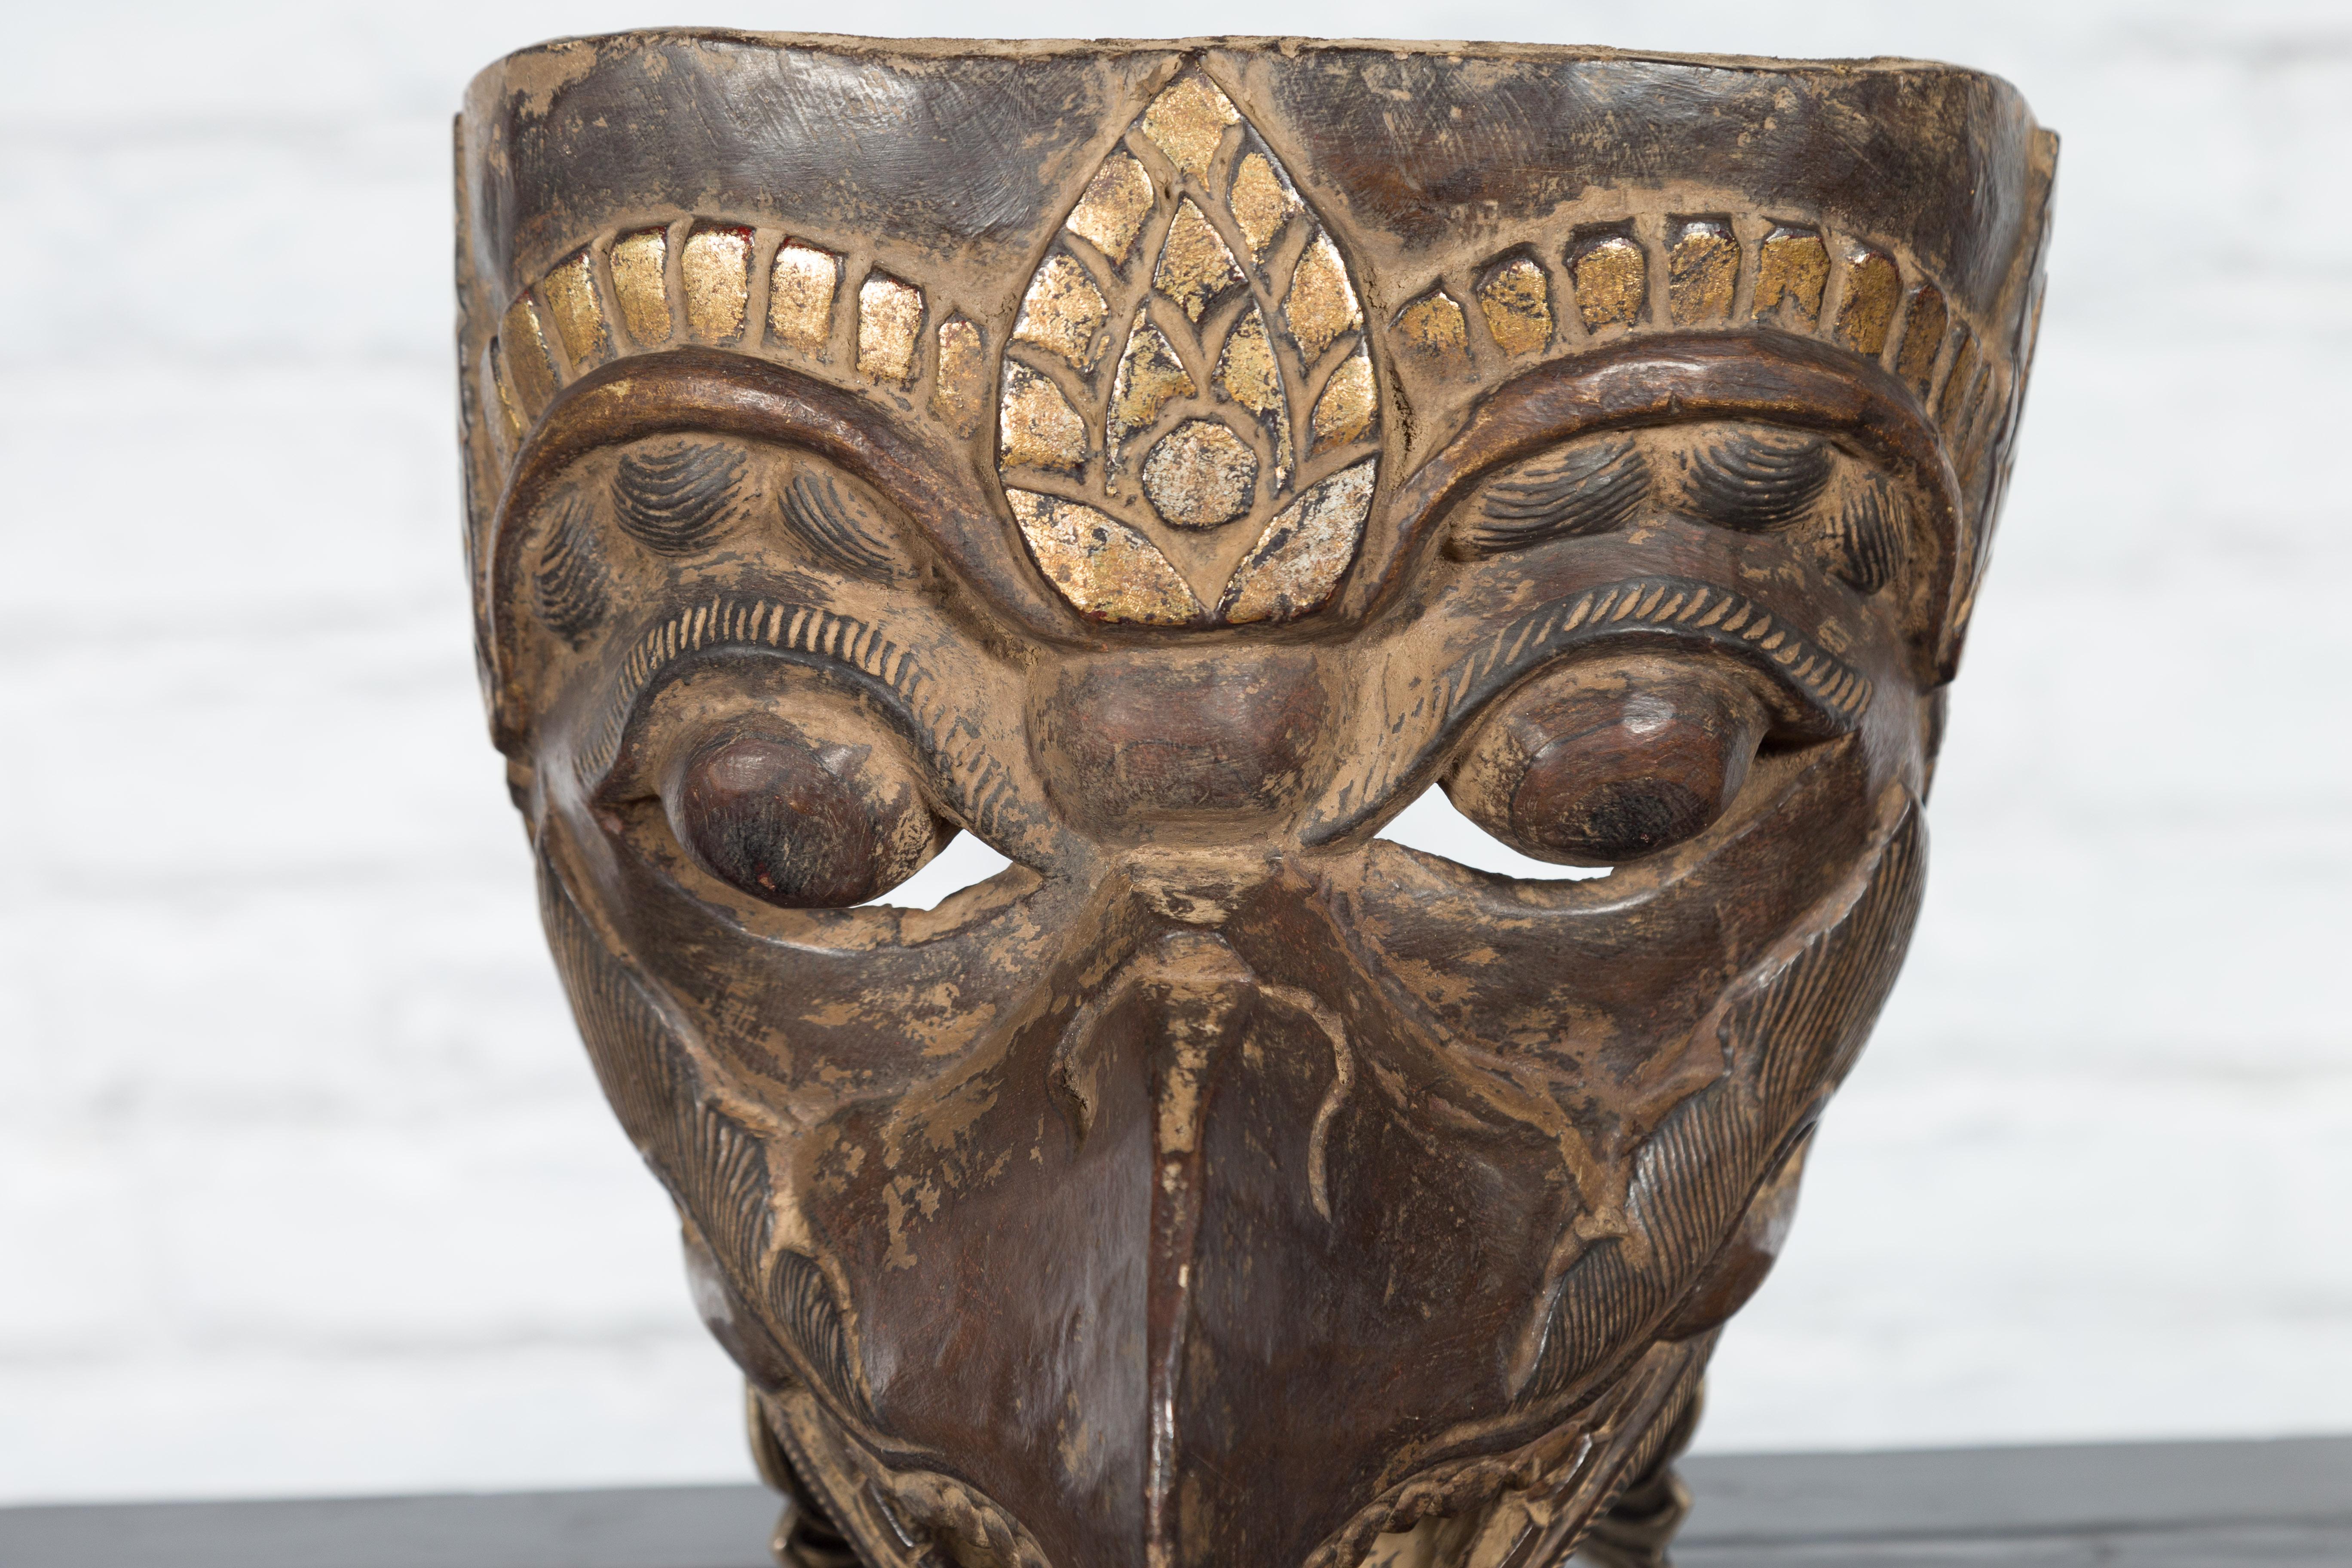 20th Century Indonesian Tribal Lombok Animal Mask with Gilded Accents and Striking Features